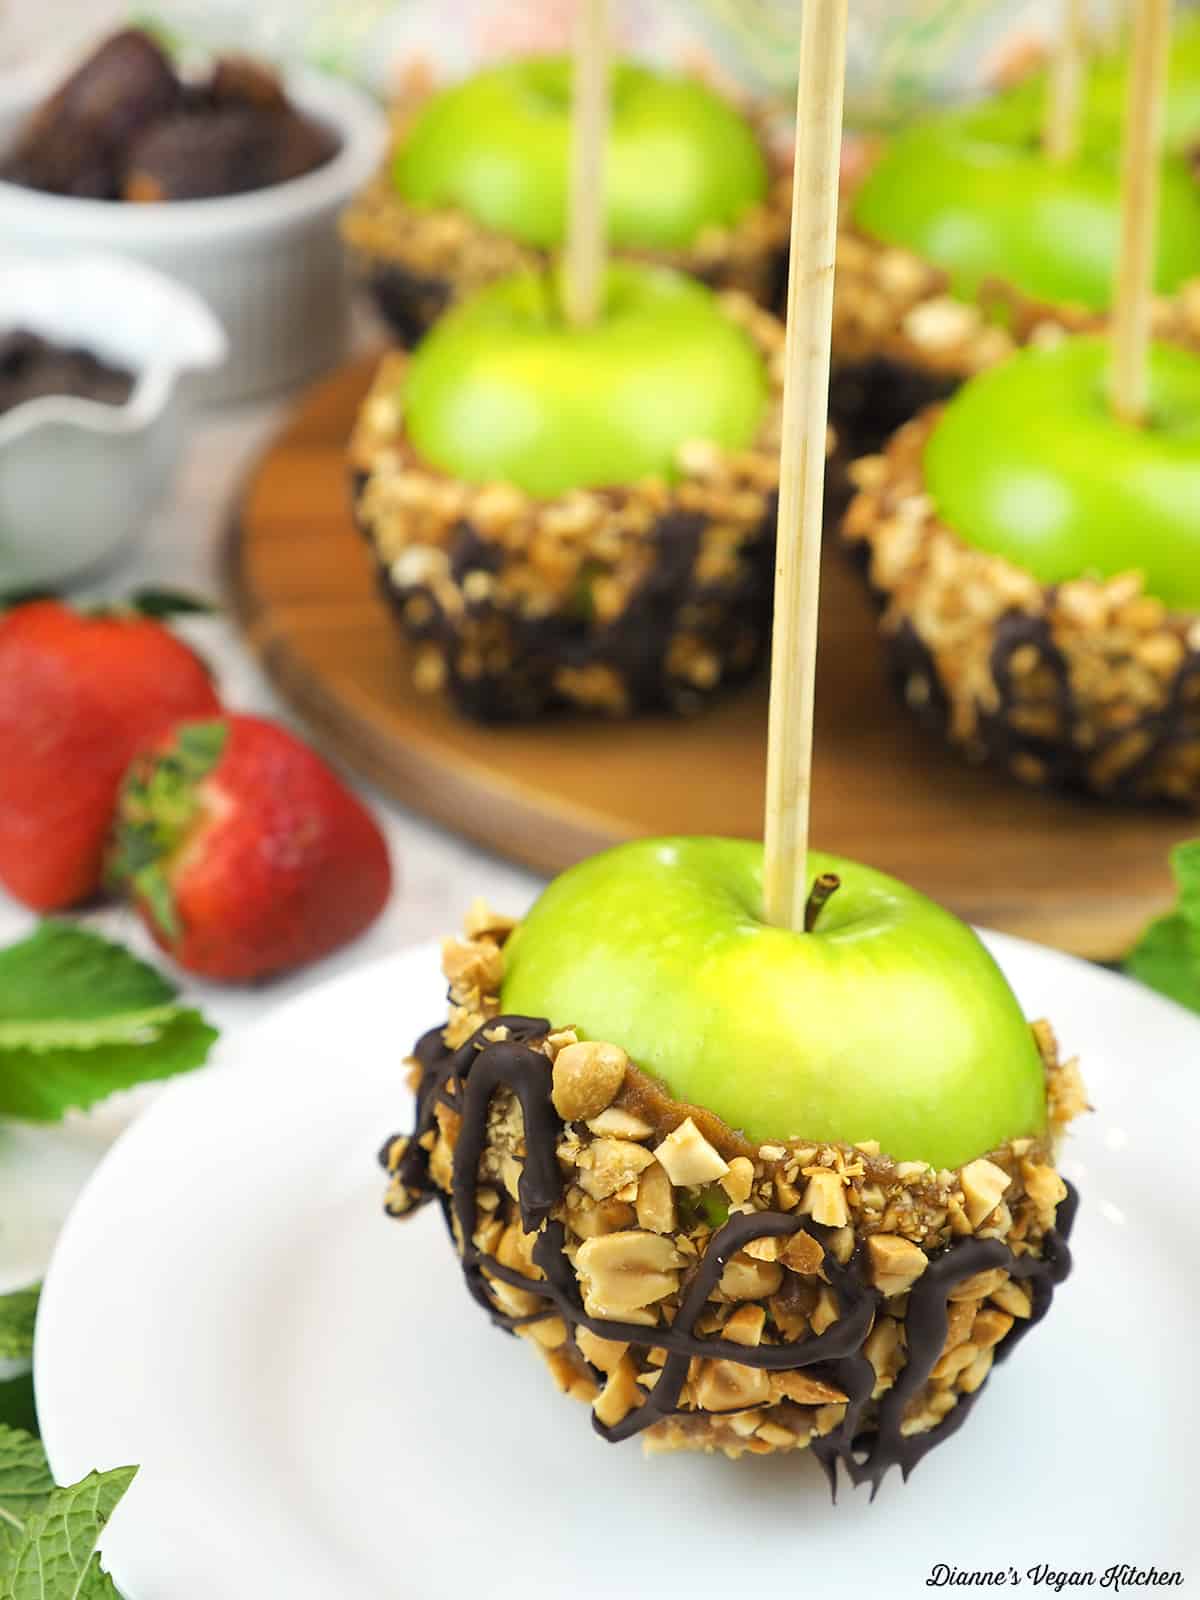 caramel apple on plate with more apples in the background